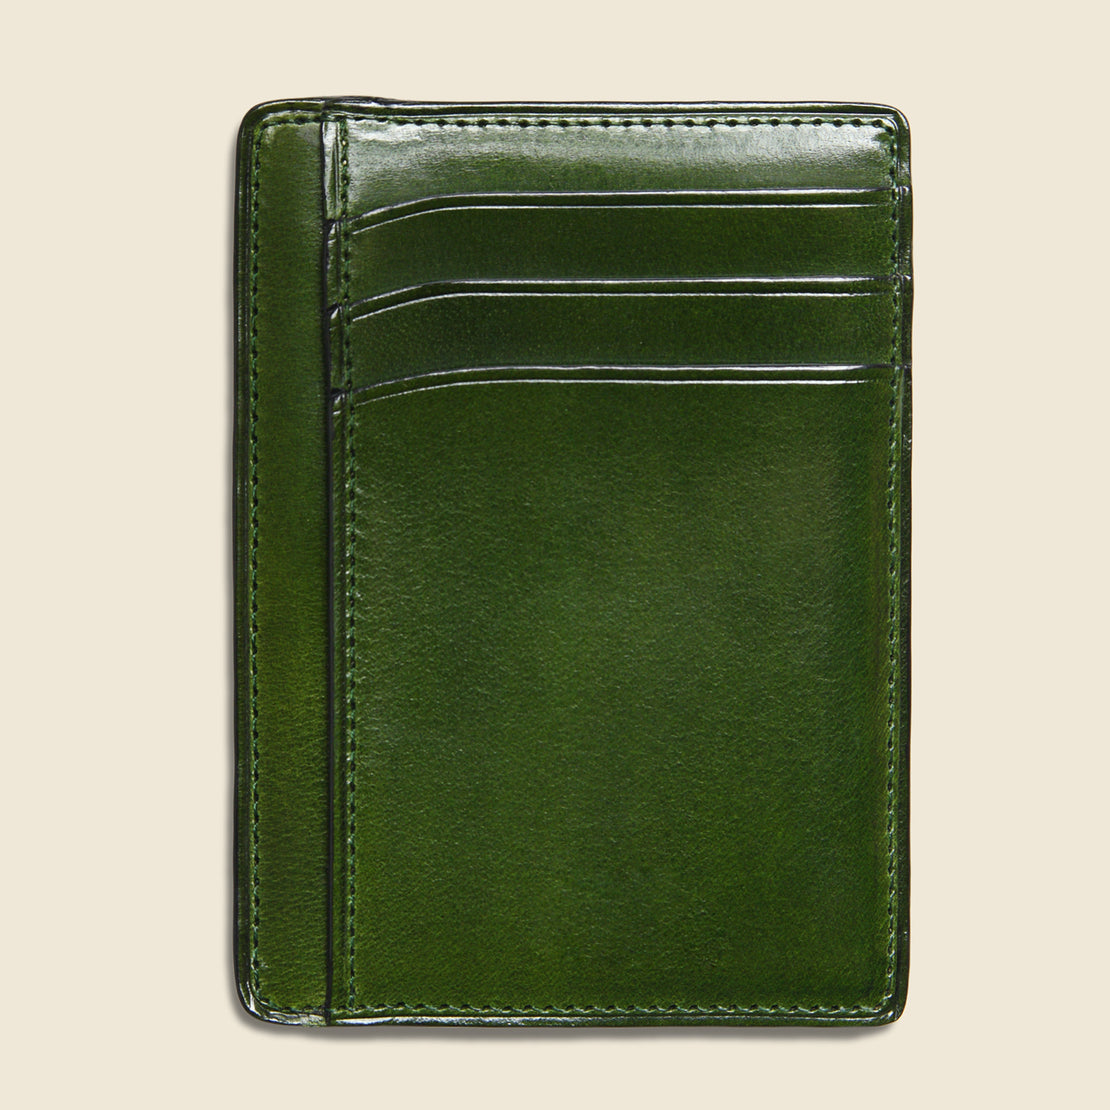 Card and Document Case - Green - Il Bussetto - STAG Provisions - Accessories - Wallets